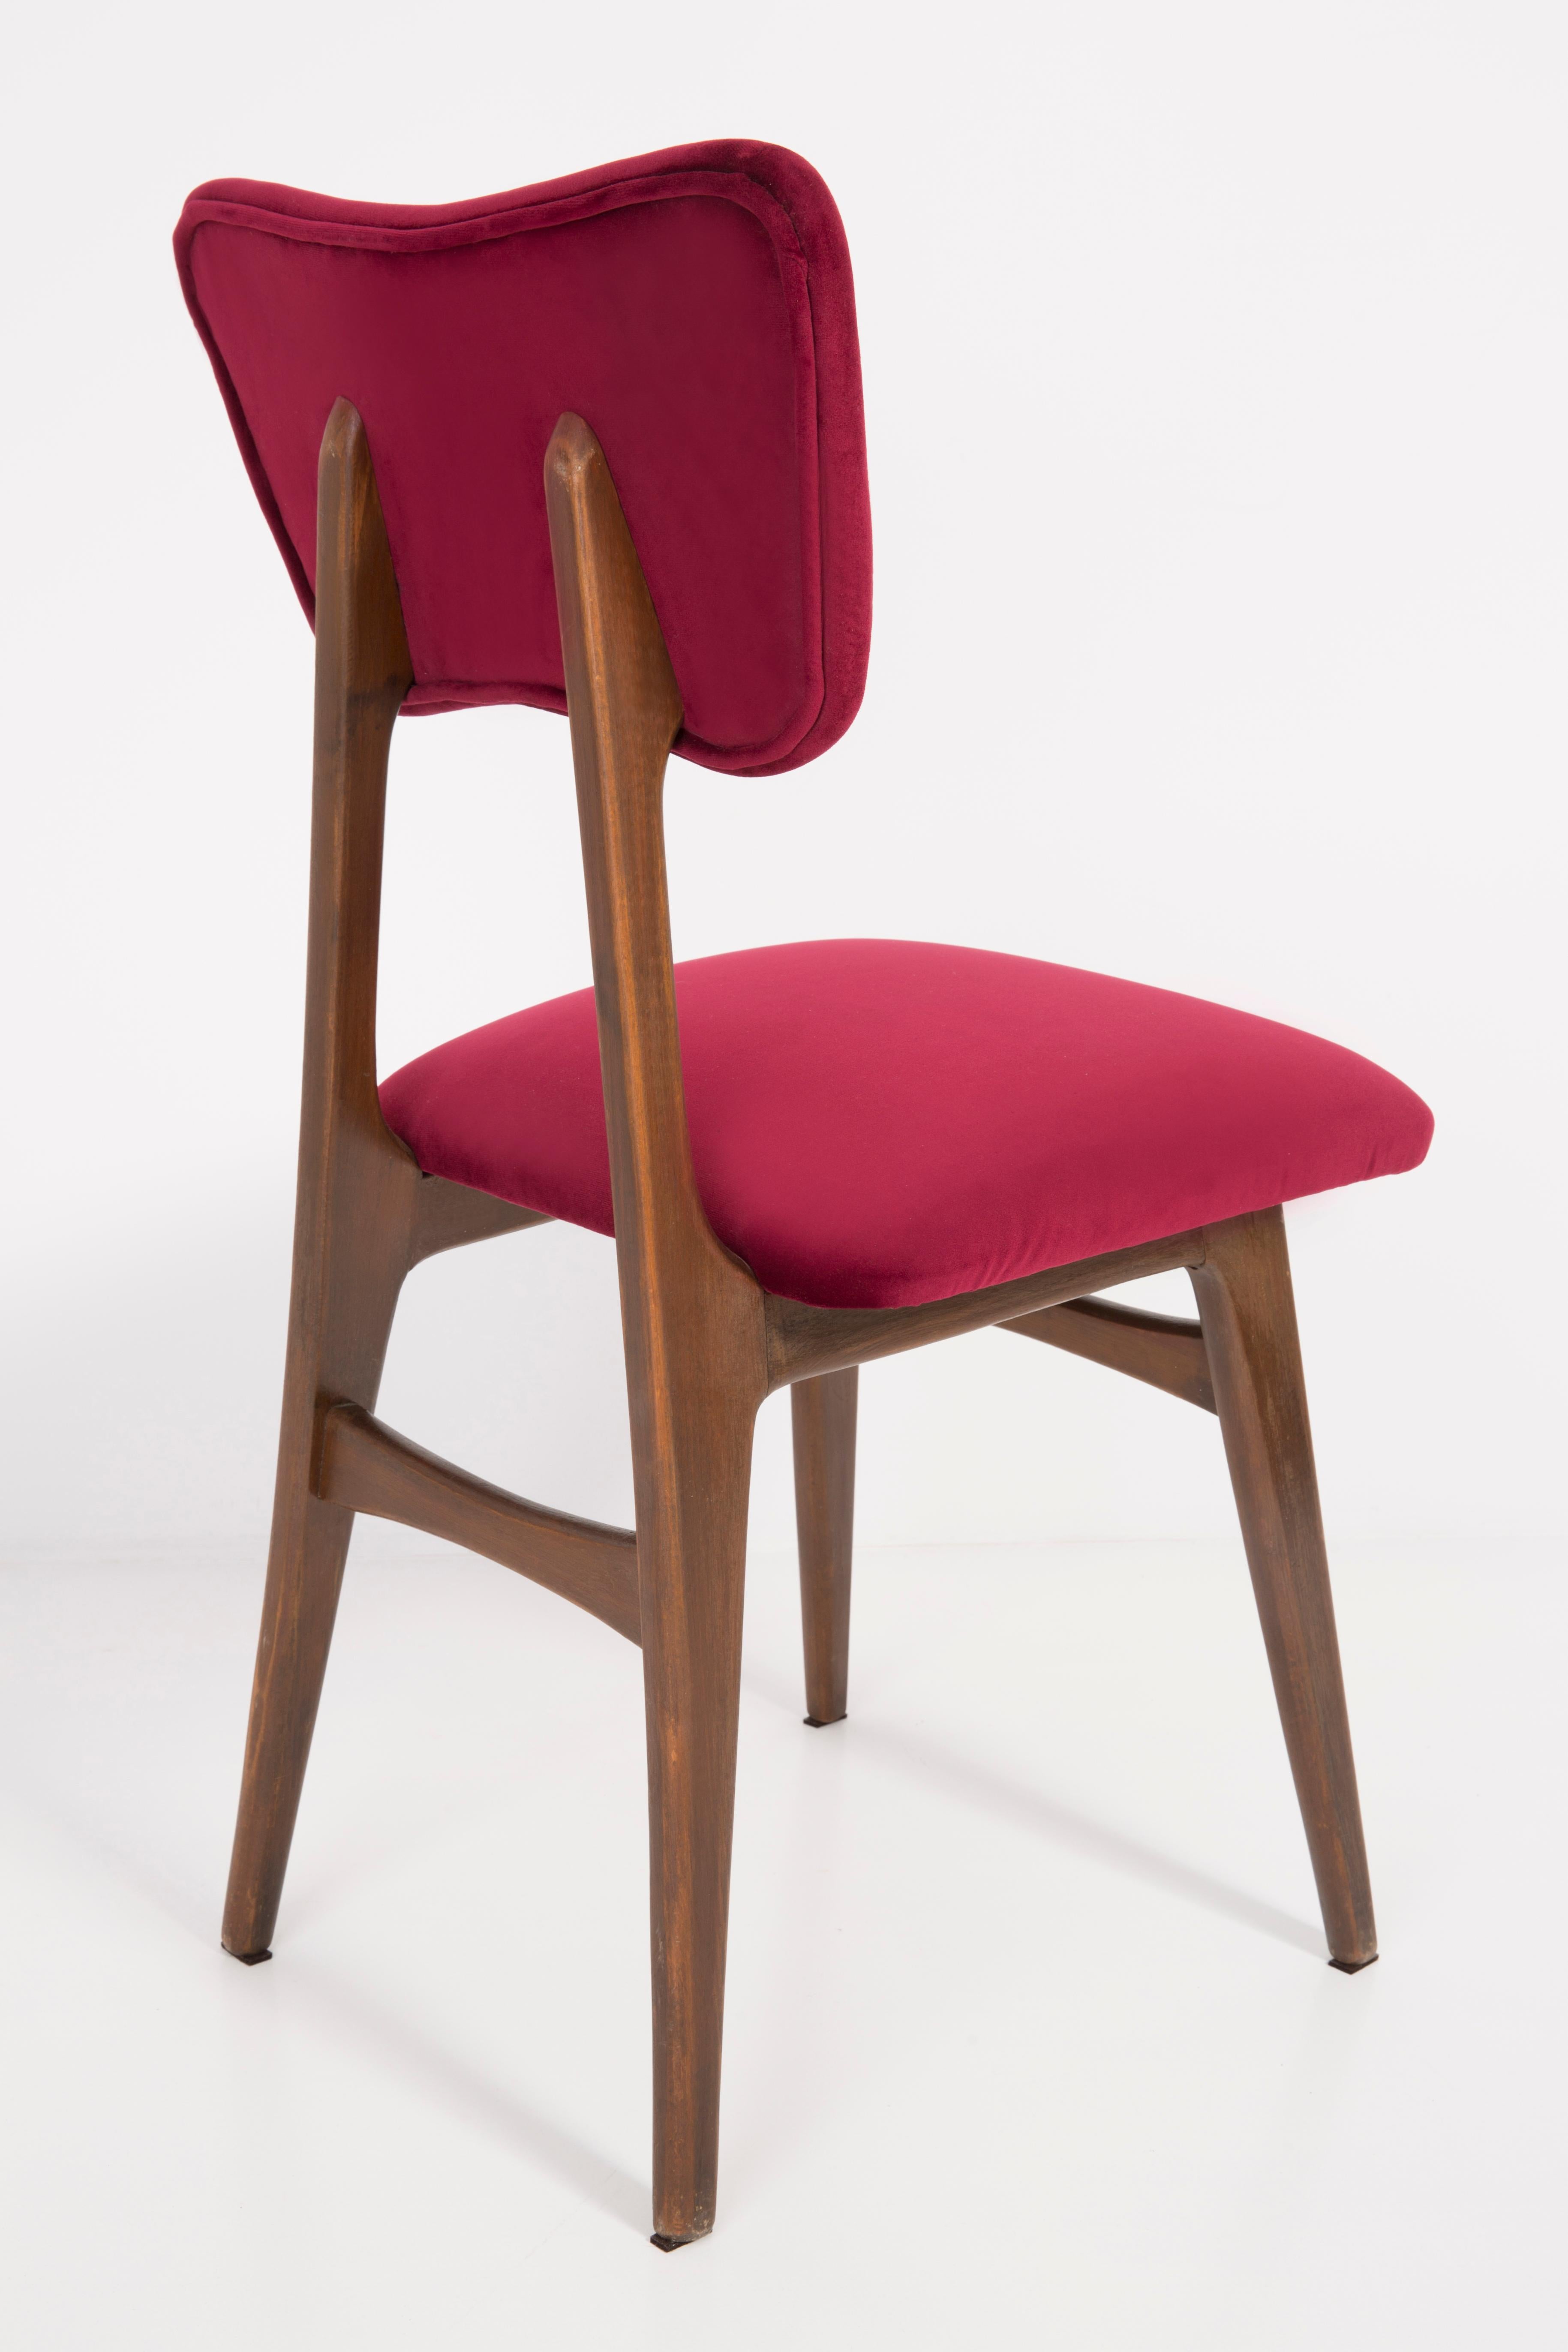 Set of Twelve 20th Century Burgundy Red Chairs, 1960s In Excellent Condition For Sale In 05-080 Hornowek, PL